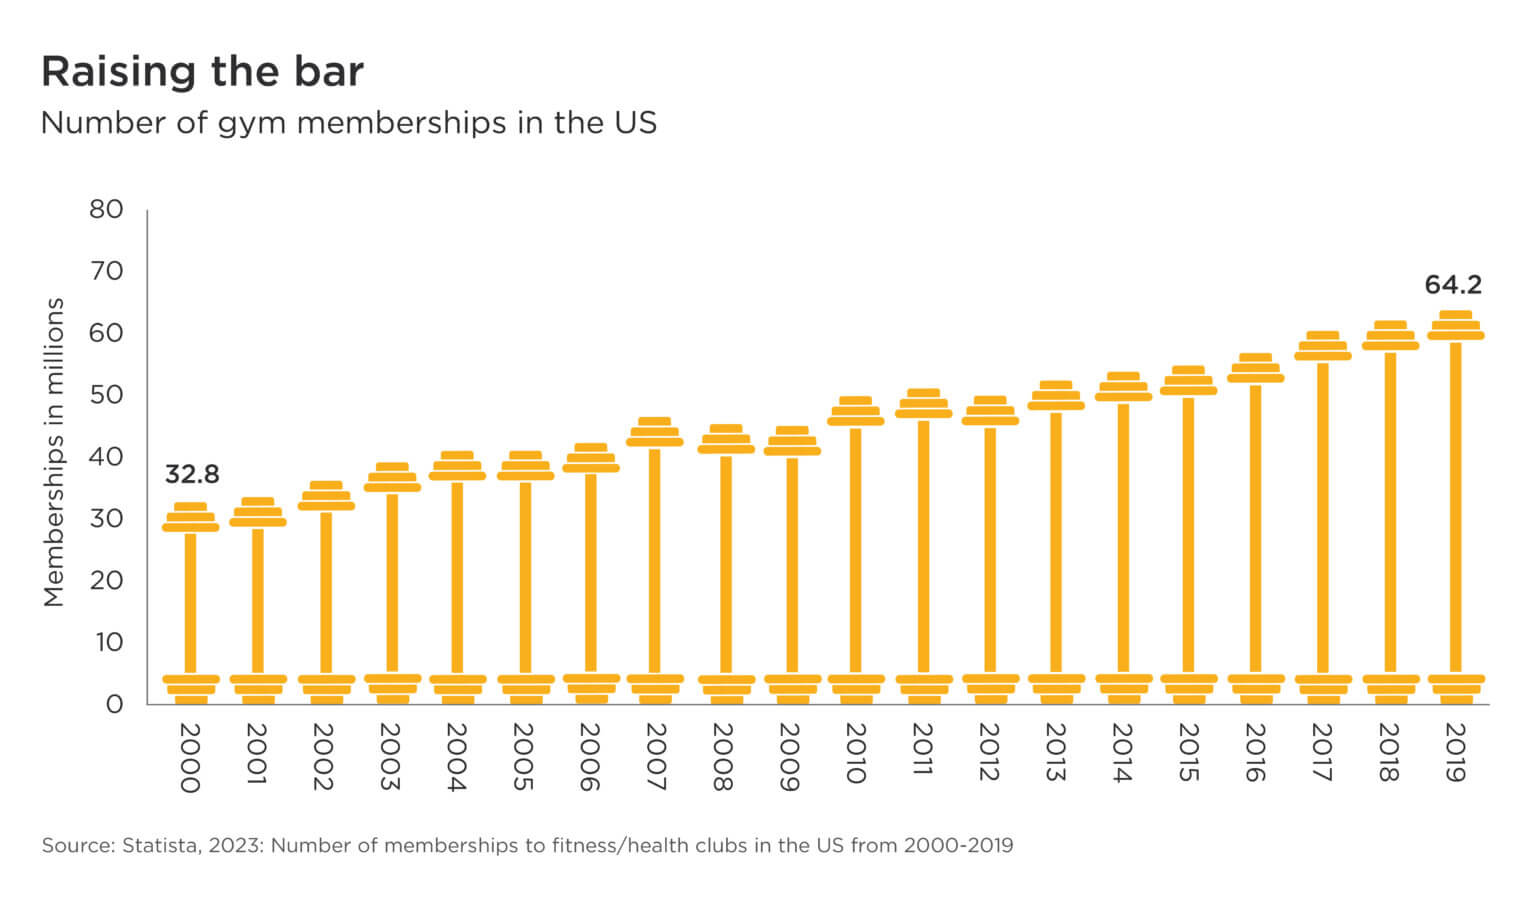 Number of gym memberships in the US